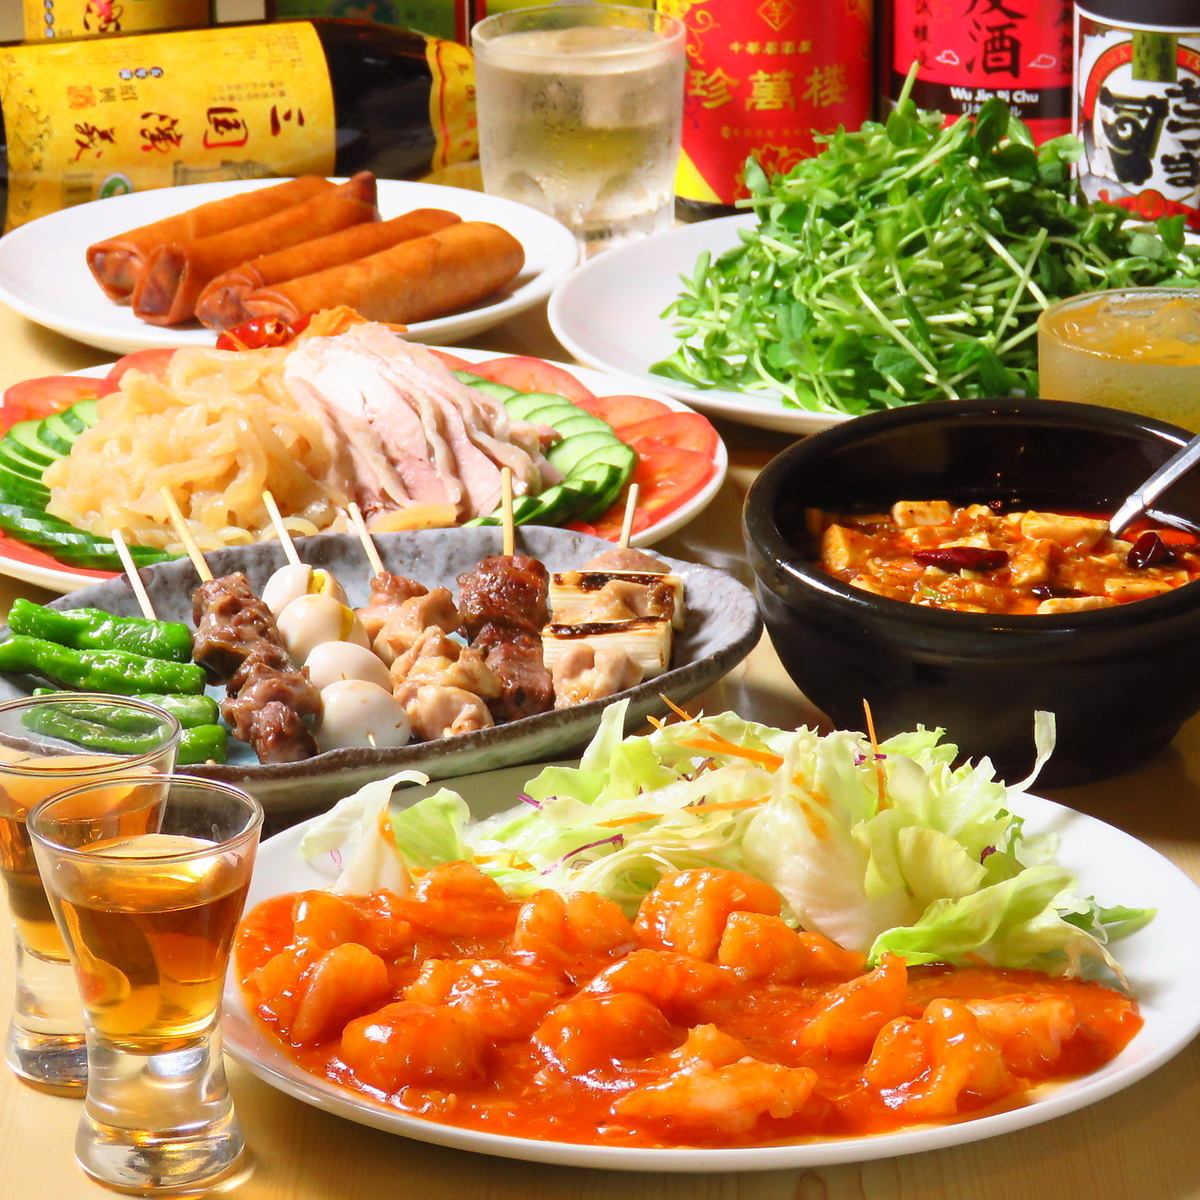 All-you-can-drink course 3580 yen ~ ♪♪ 1 minute walk from Zama Station ・ Authentic Chinese food loved by the locals